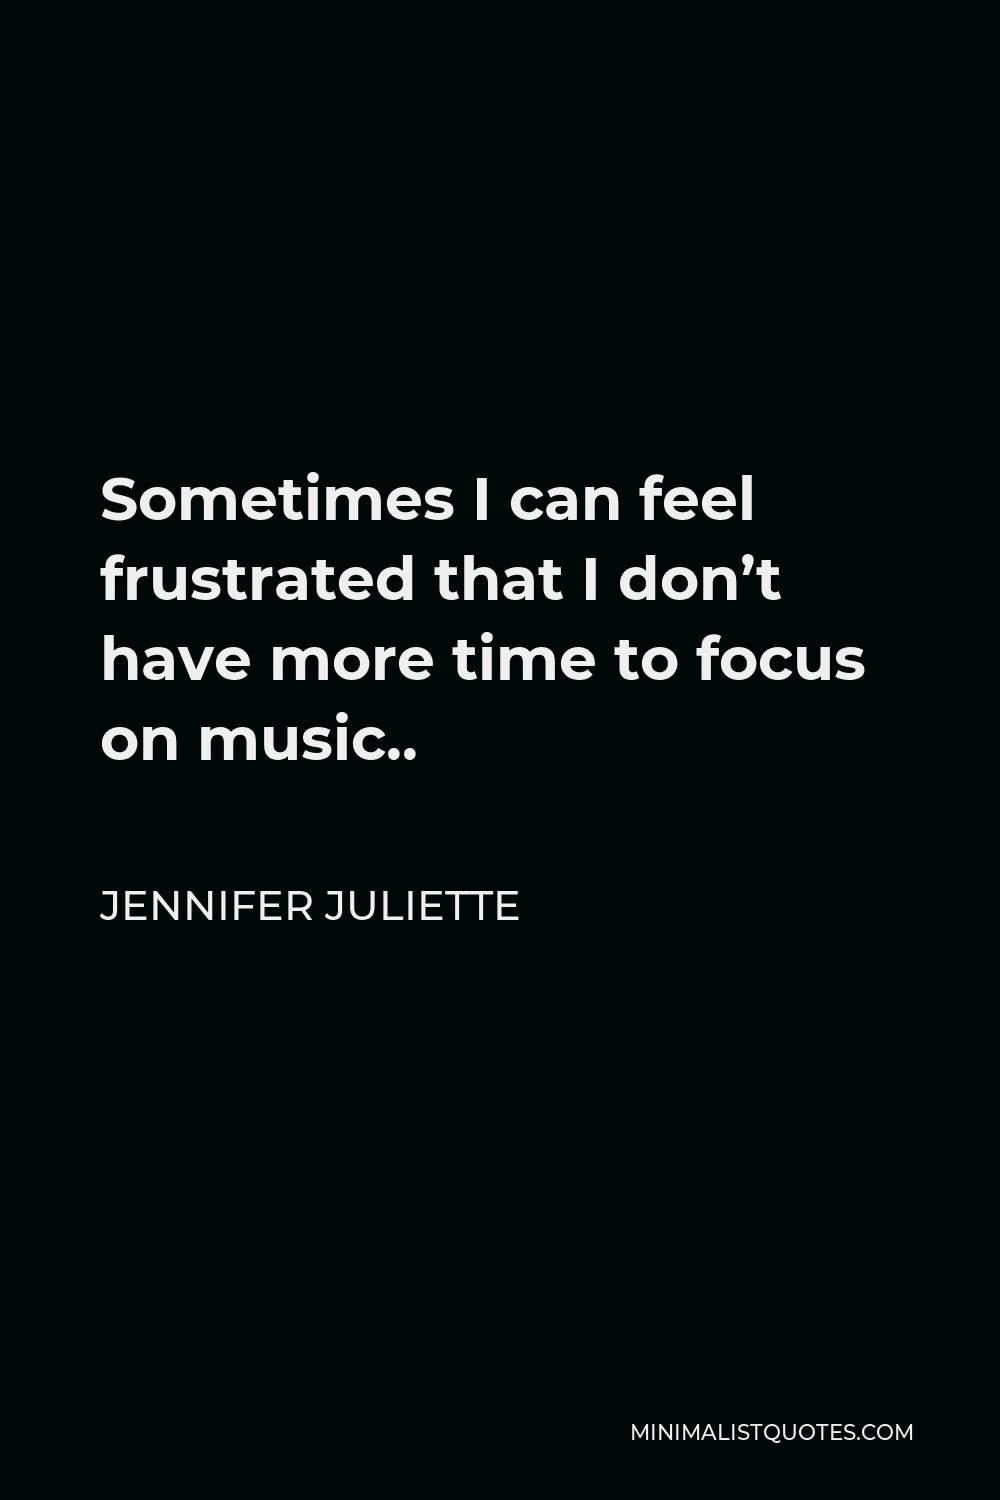 Jennifer Juliette Quote - Sometimes I can feel frustrated that I don’t have more time to focus on music..